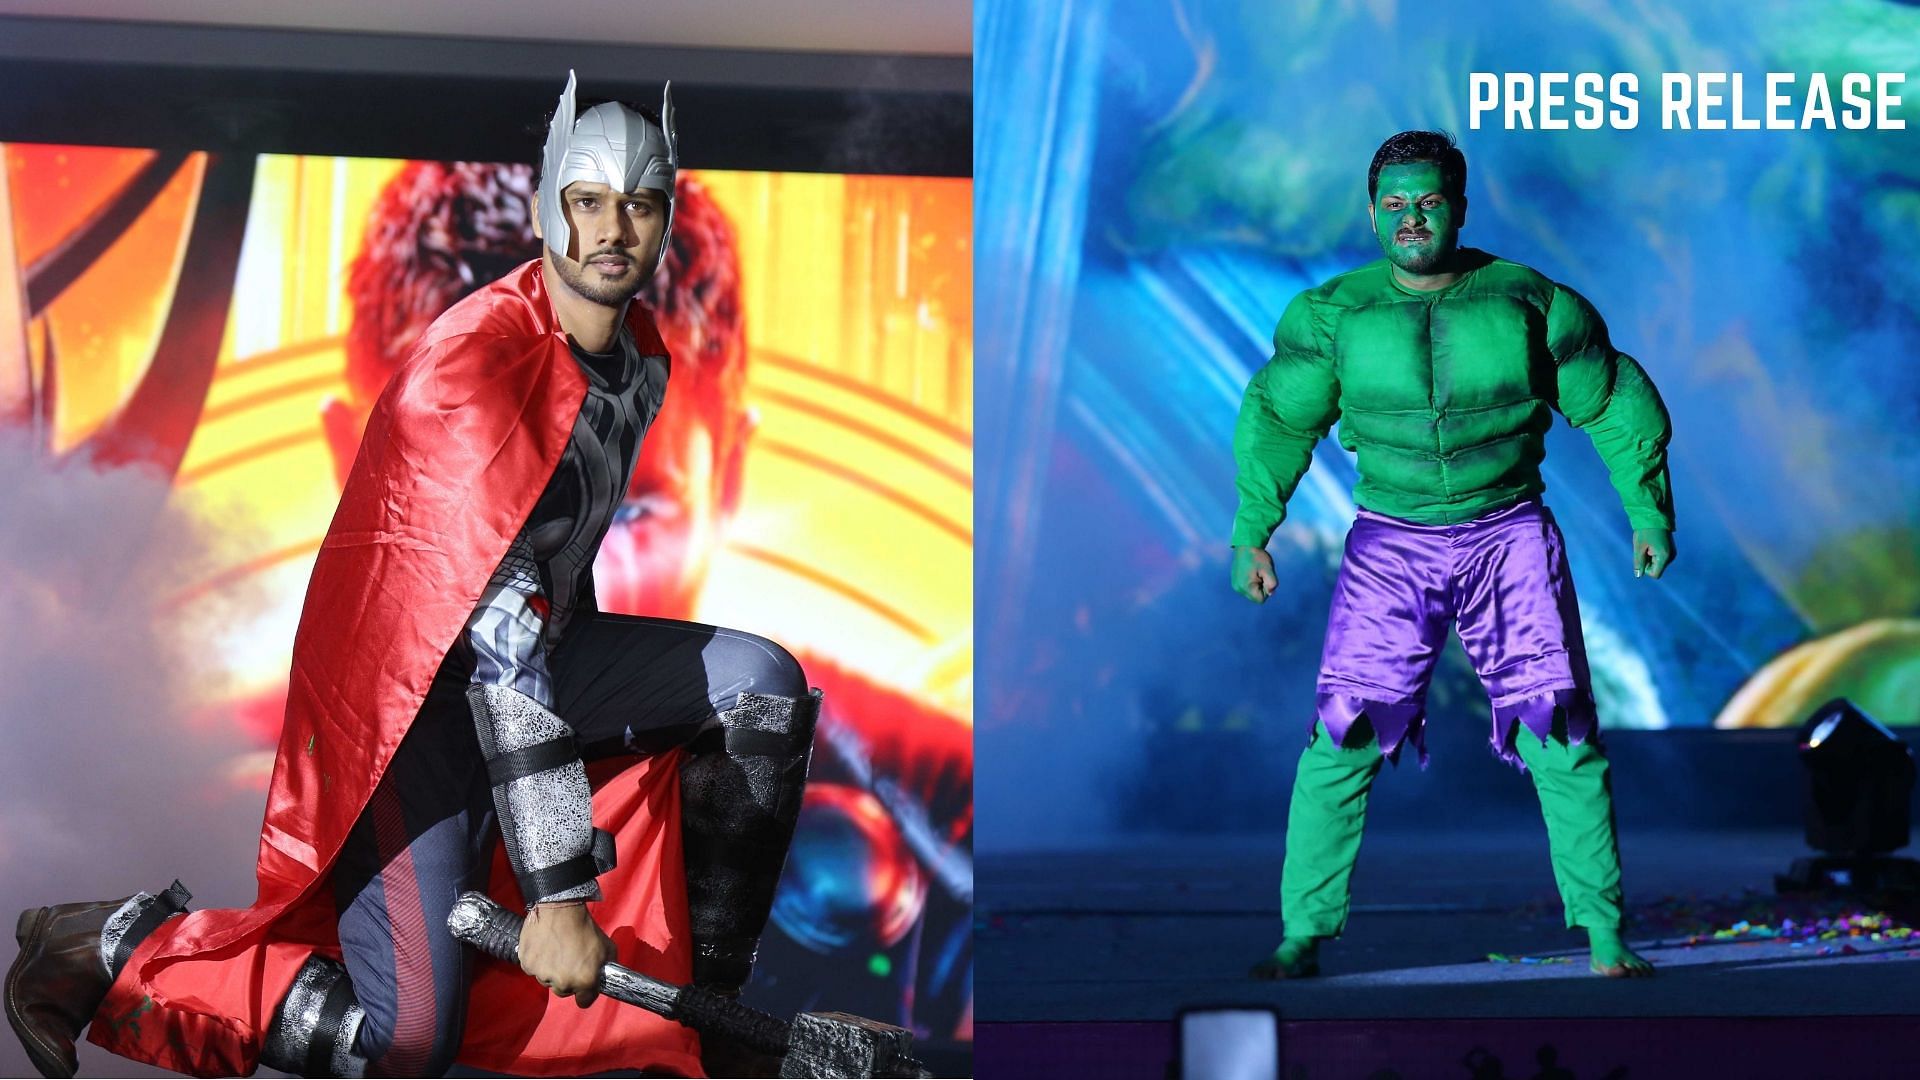 Avengers Fashion Walk unveiled a different dimension of a Fashion Show